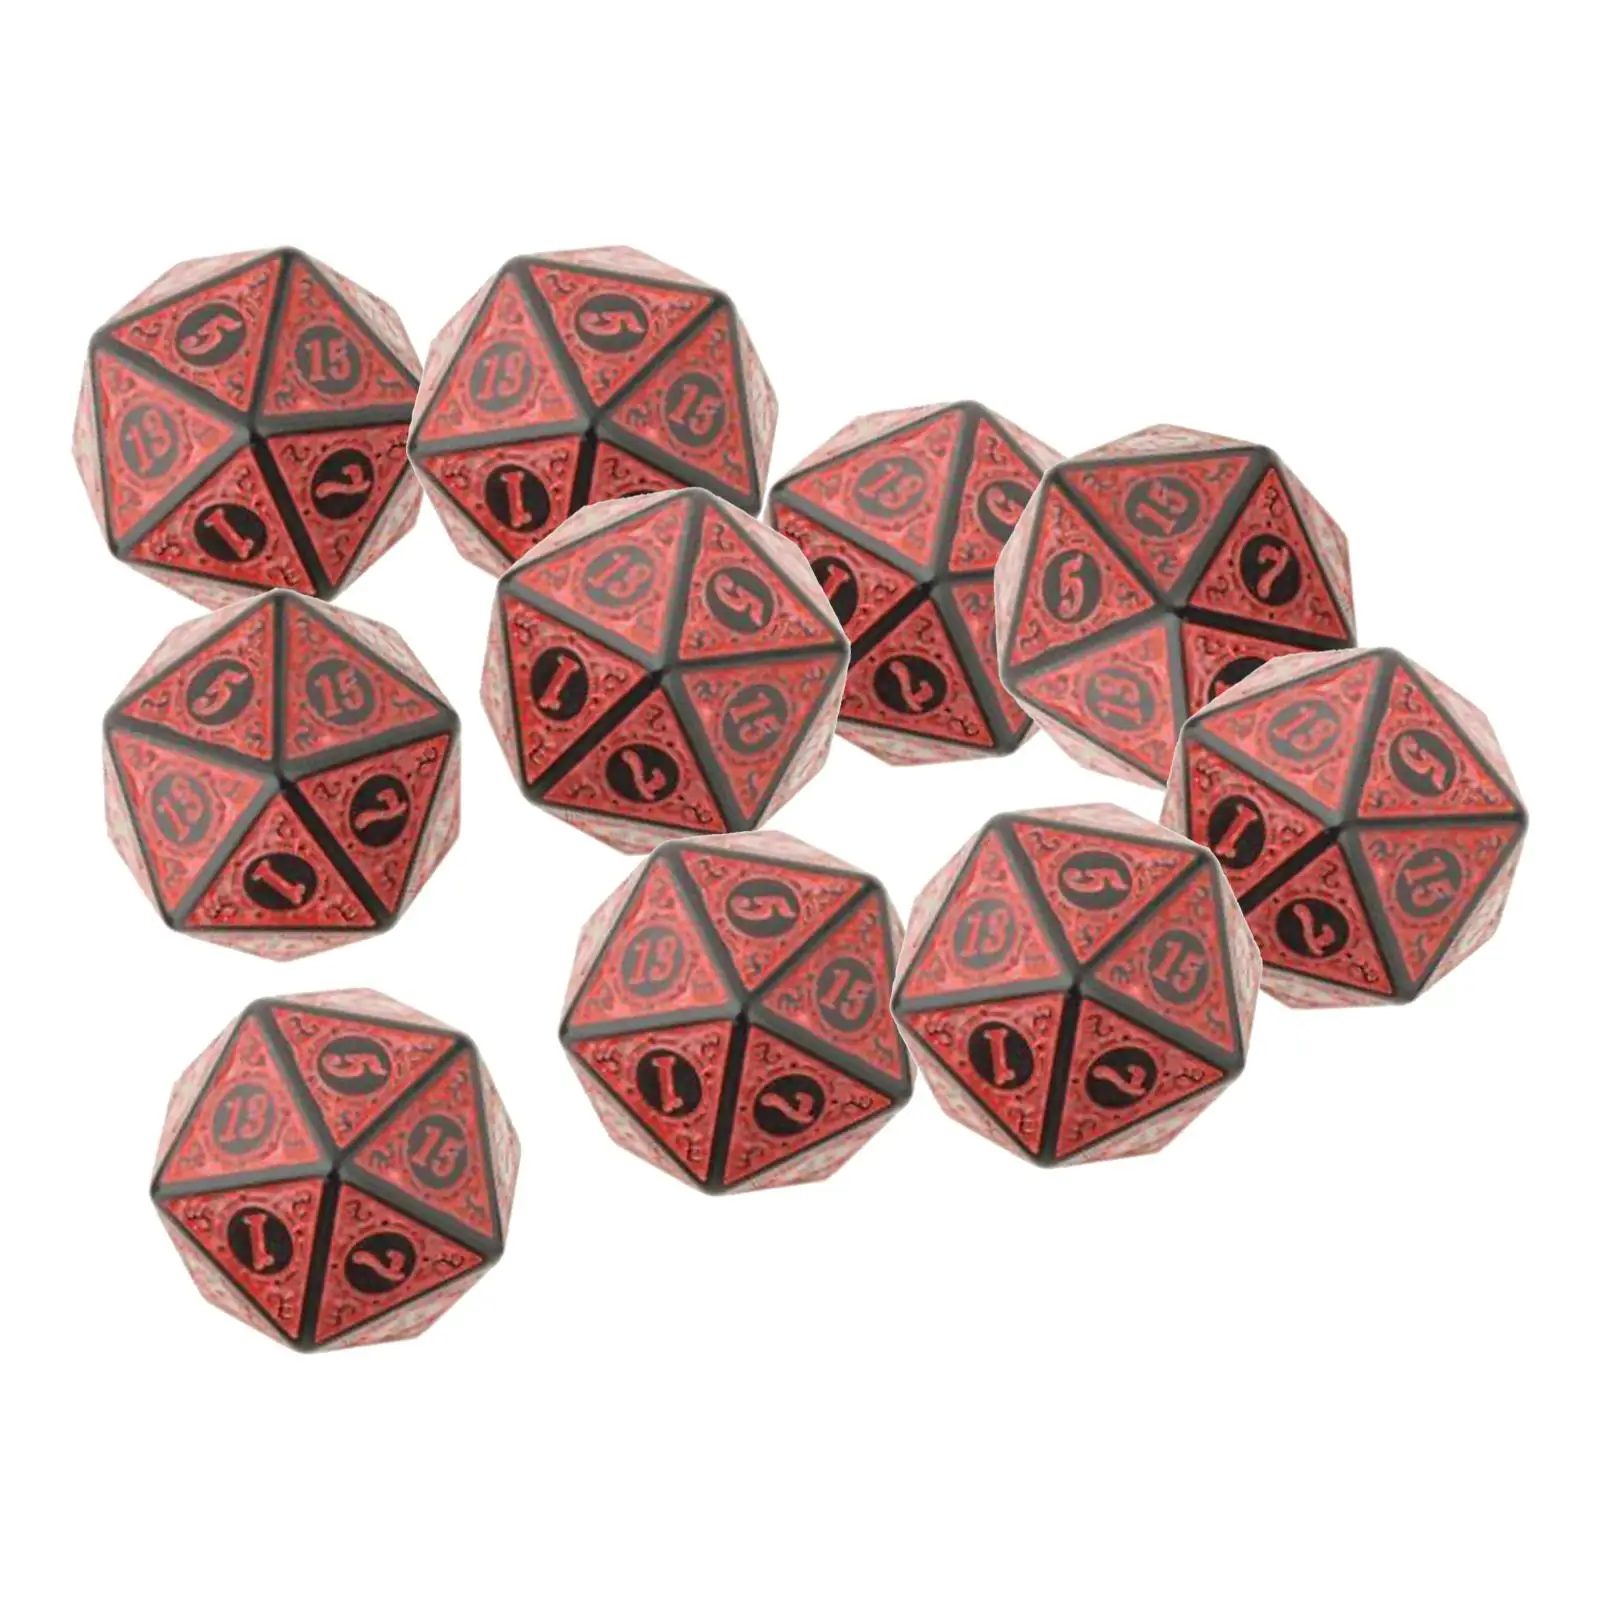 Polyhedral Dice Set of 10 Accessories Wear Resistant Lightweight for DND RPG